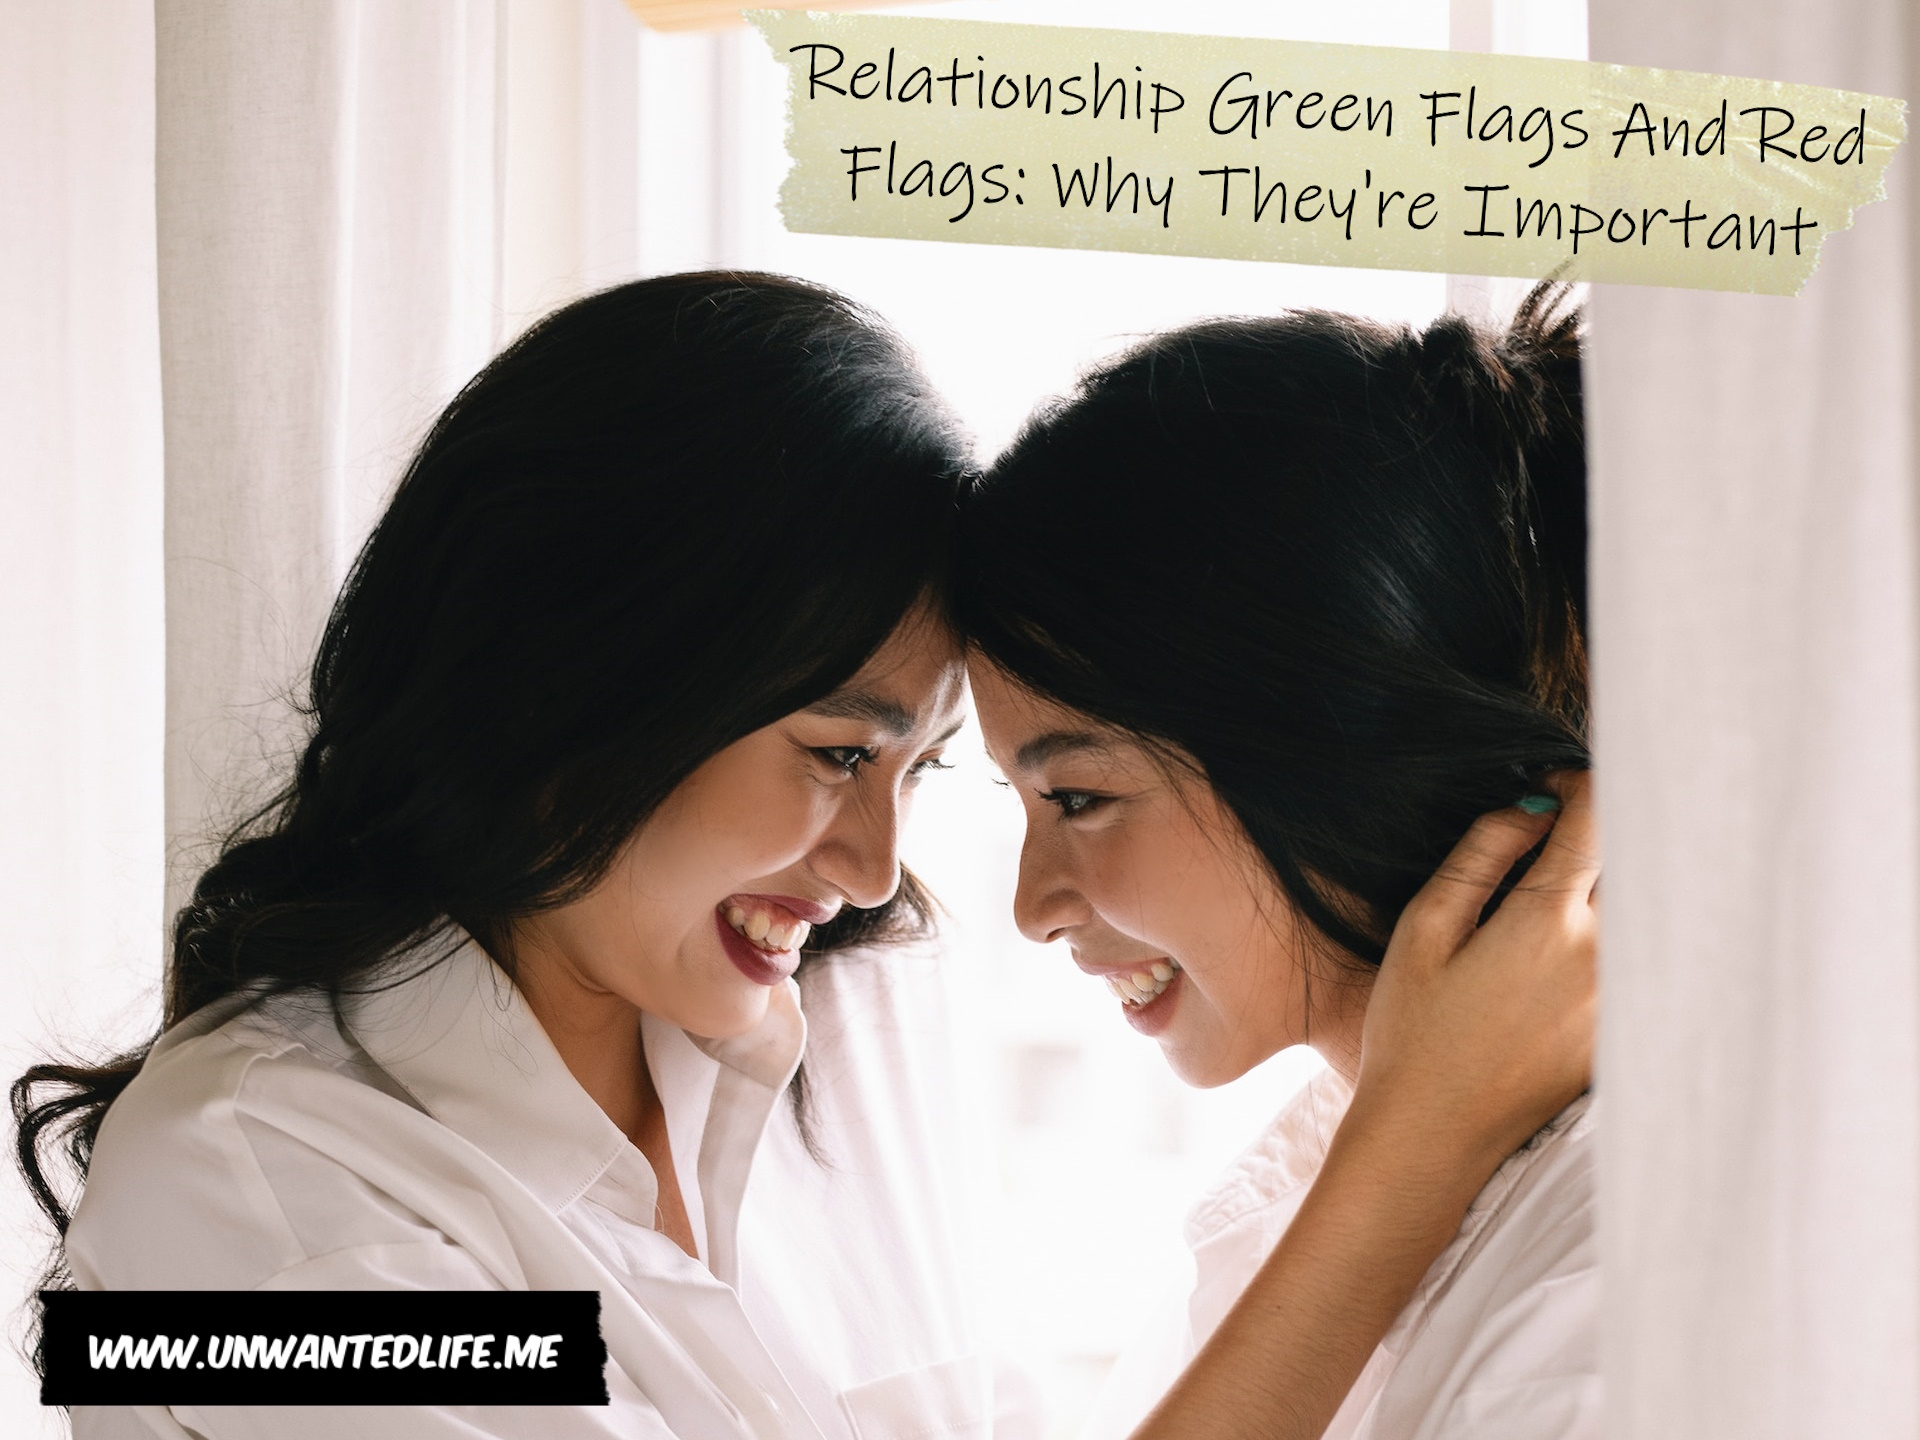 An image of two Asian women engaging in displays of affection to represent the topic of the article - Relationship Green Flags And Red Flags: Why They're Important